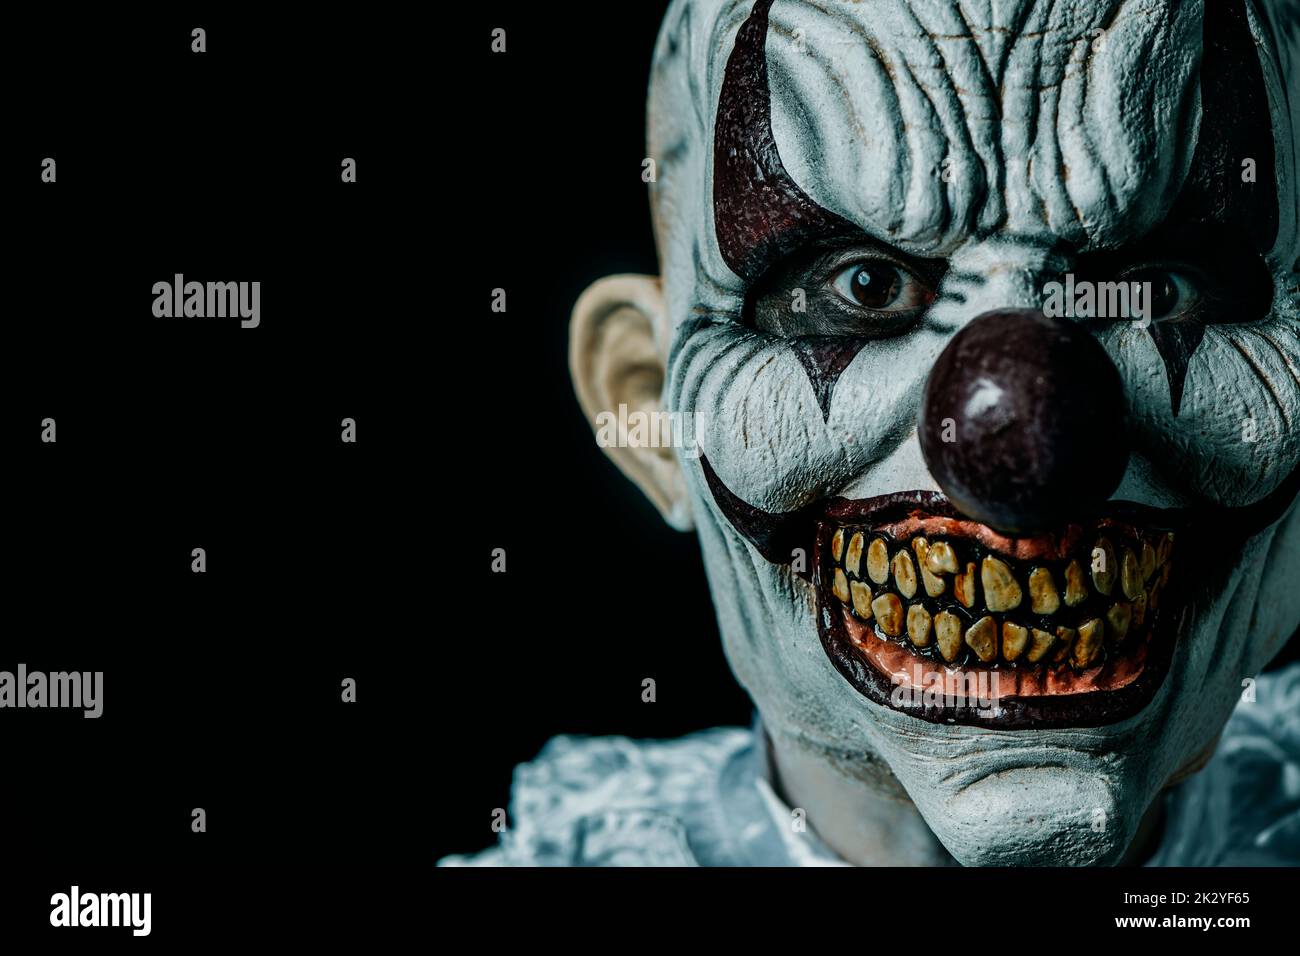 a creepy bald evil clown stares at the observer, against a black background with some blank space on the left Stock Photo